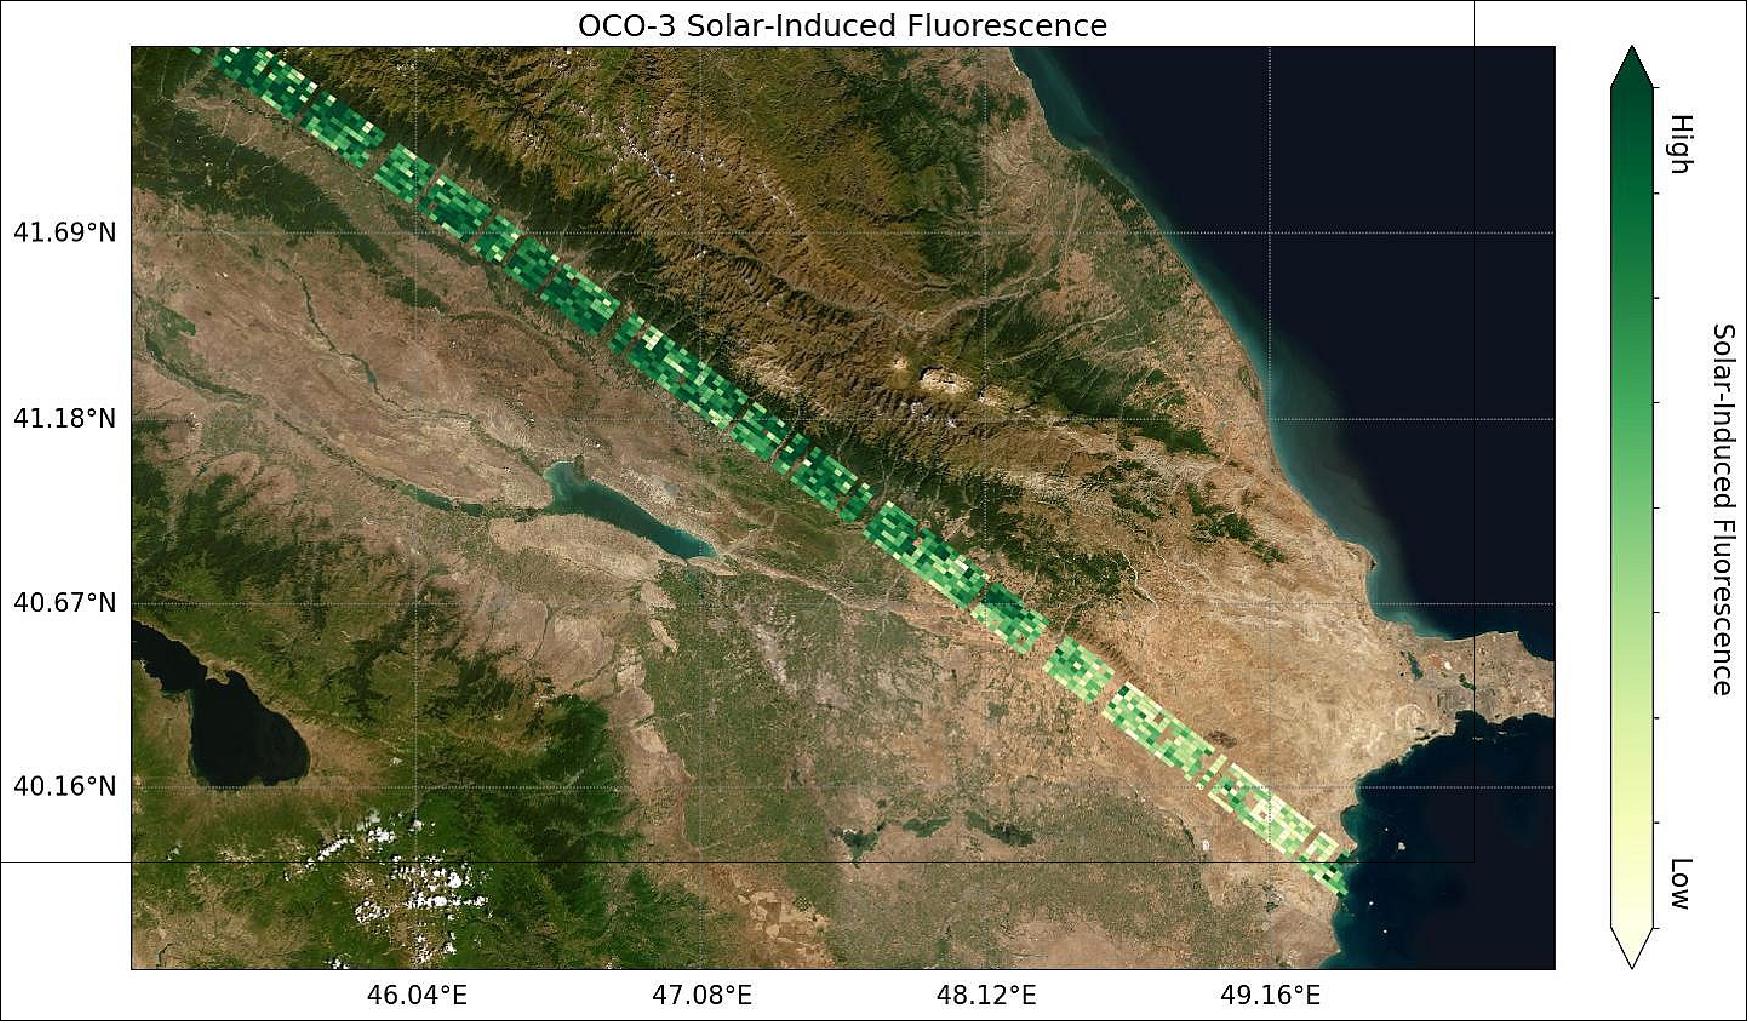 Figure 82: A chart of OCO-3 data that shows solar-induced fluorescence in western Asia. Areas with lower plant glow, indicating lower photosynthesis activity, are shown in light green. Areas with higher photosynthesis activity are shown in dark green (image credit: NASA)